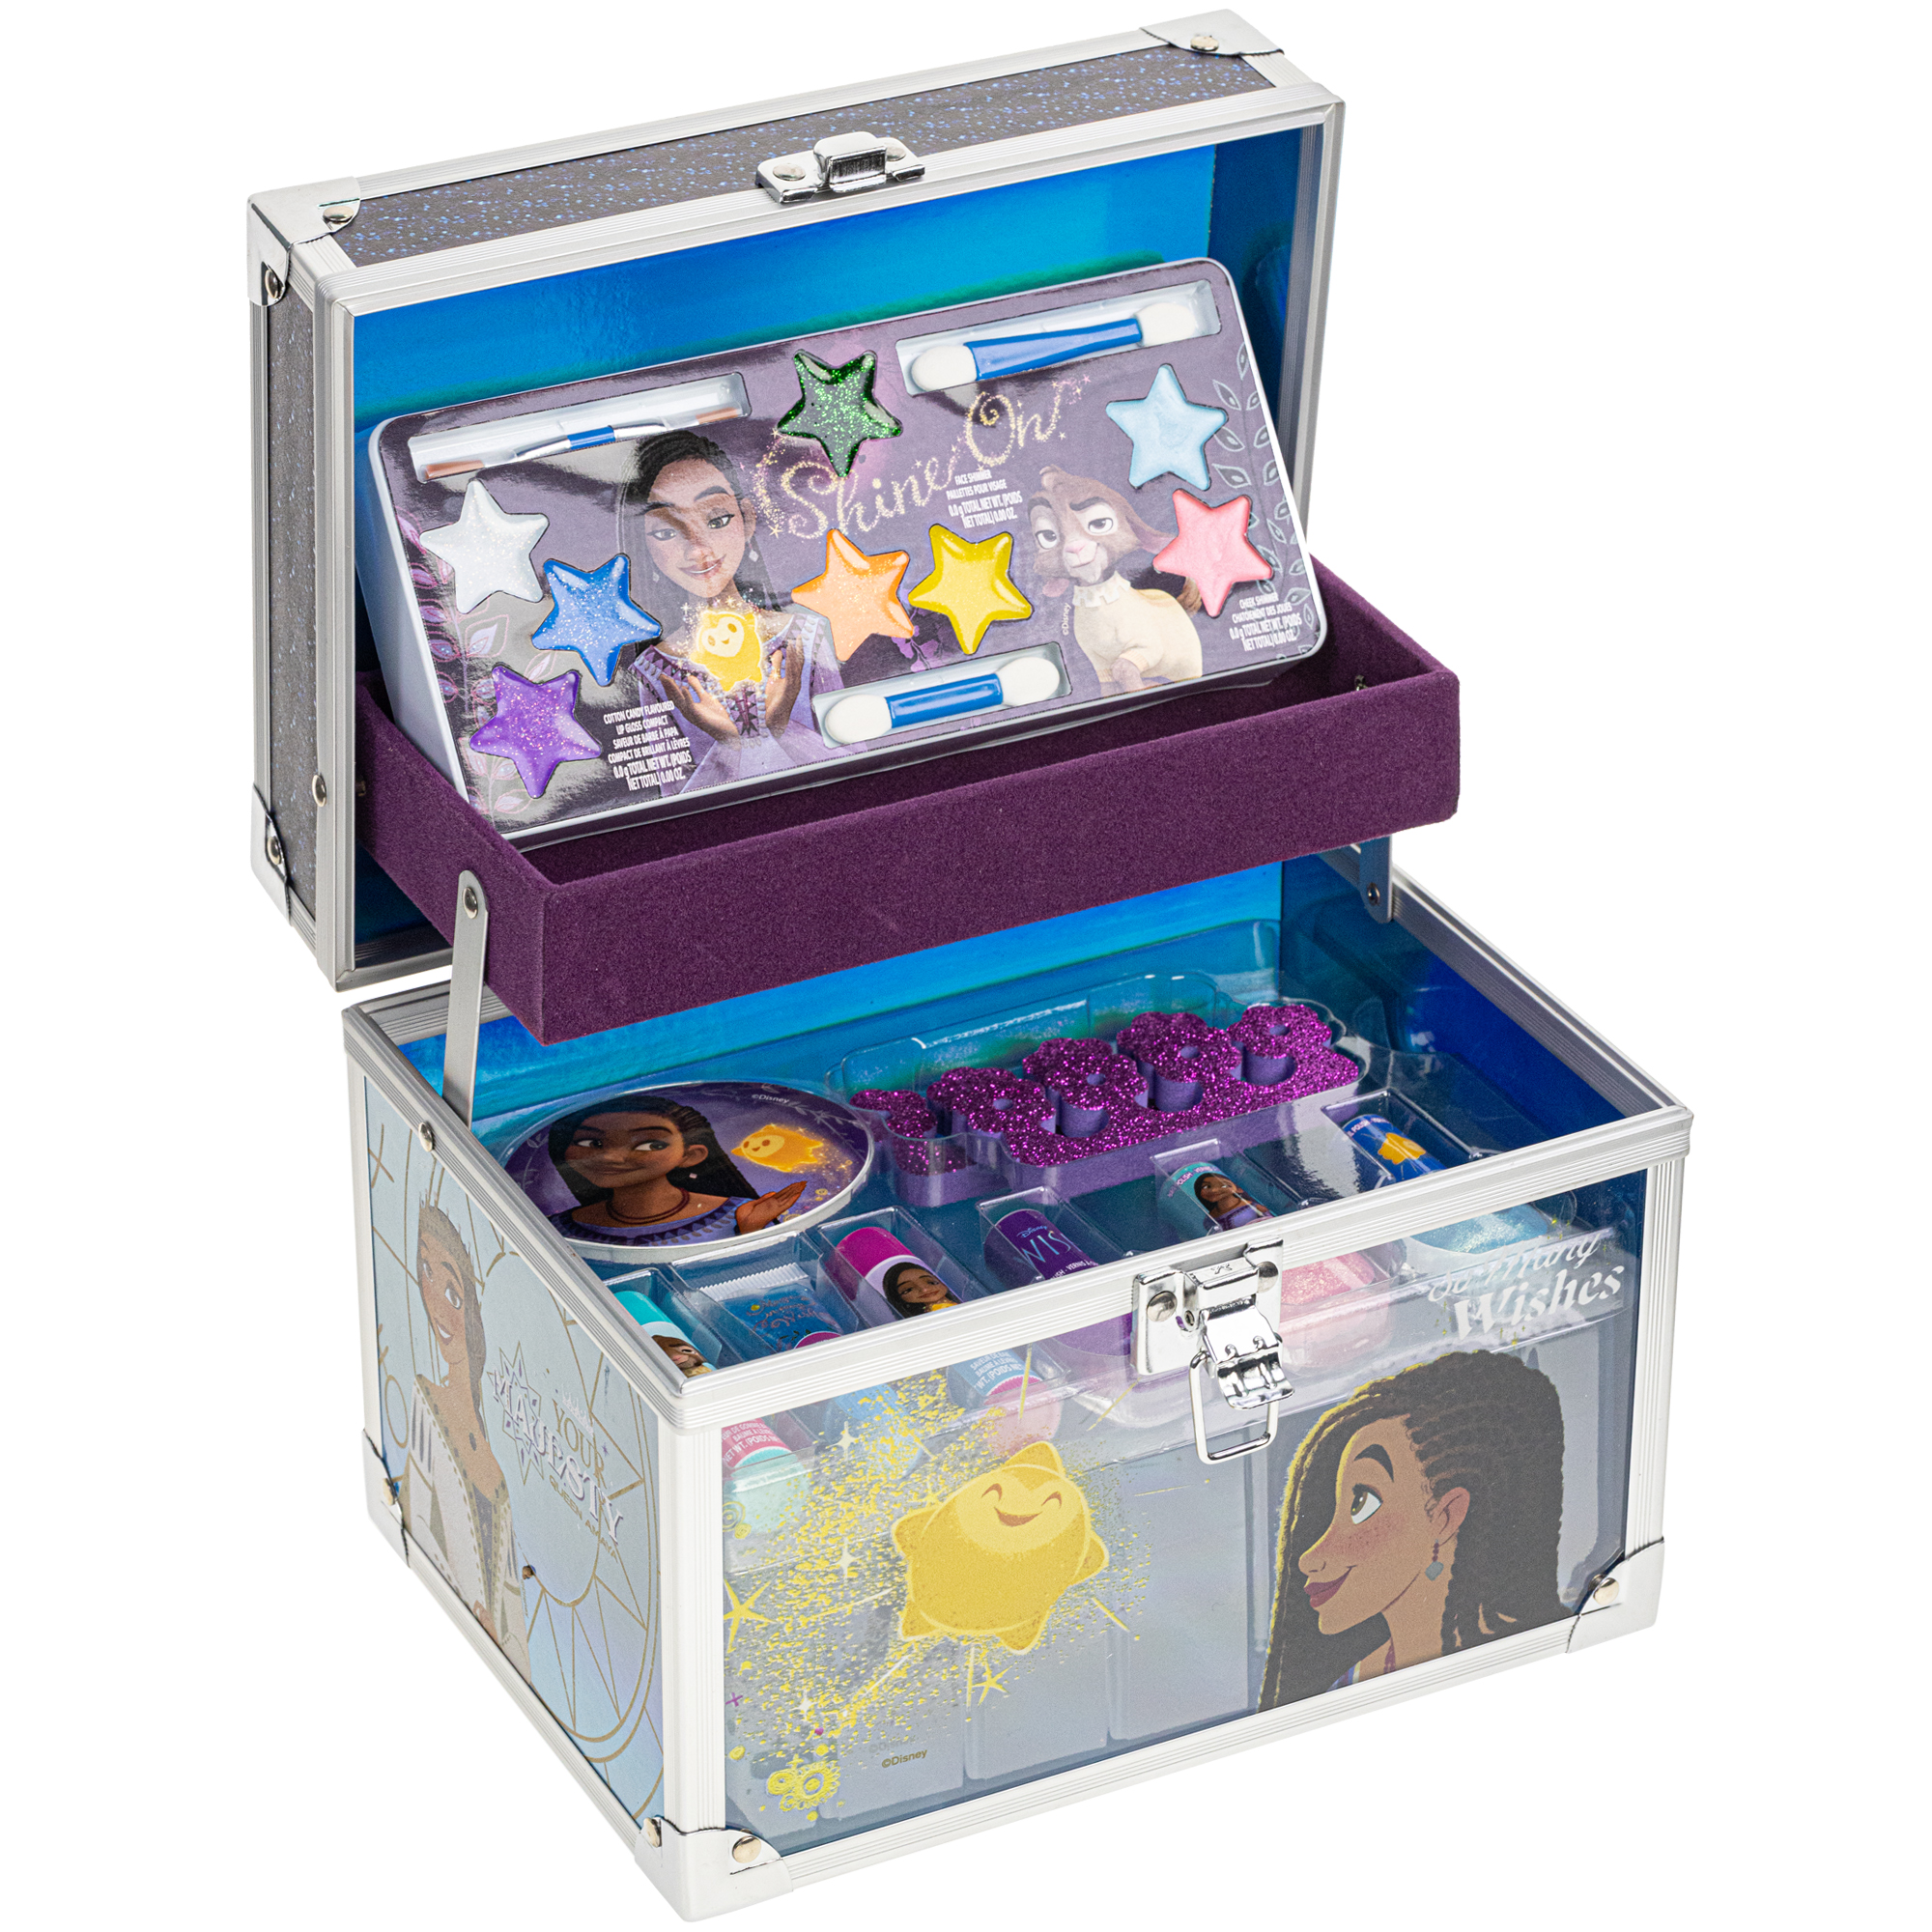 Disney Wish Train Case Pretend Play Cosmetic Set- Kids Beauty, Toy, Gift for Girls, Ages 3+ by Townley Girl - image 4 of 9